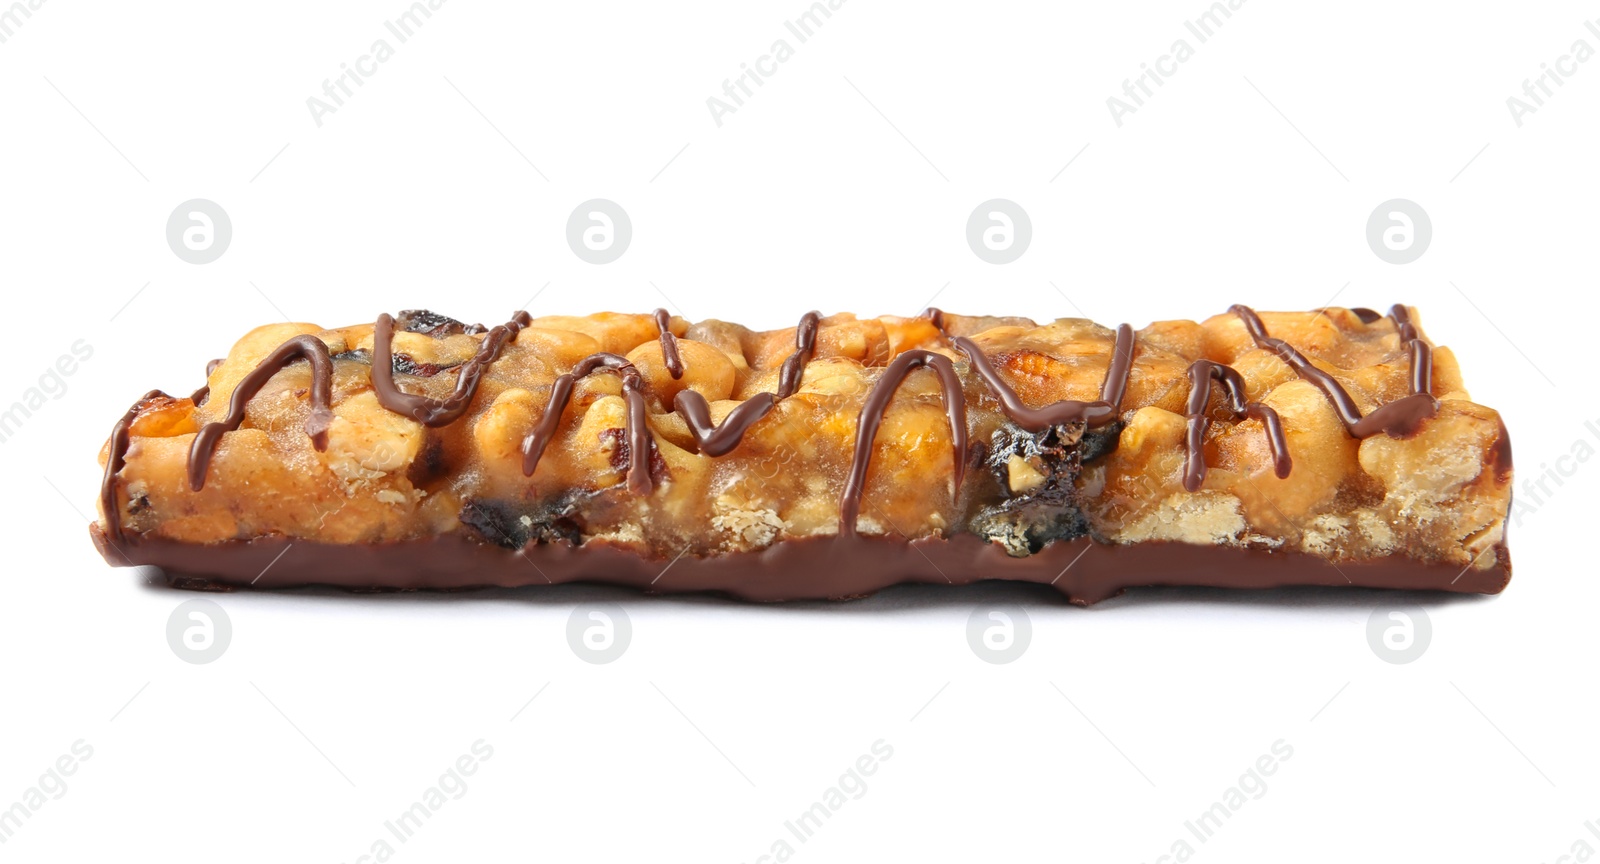 Photo of Grain cereal bar with chocolate on white background. Healthy snack